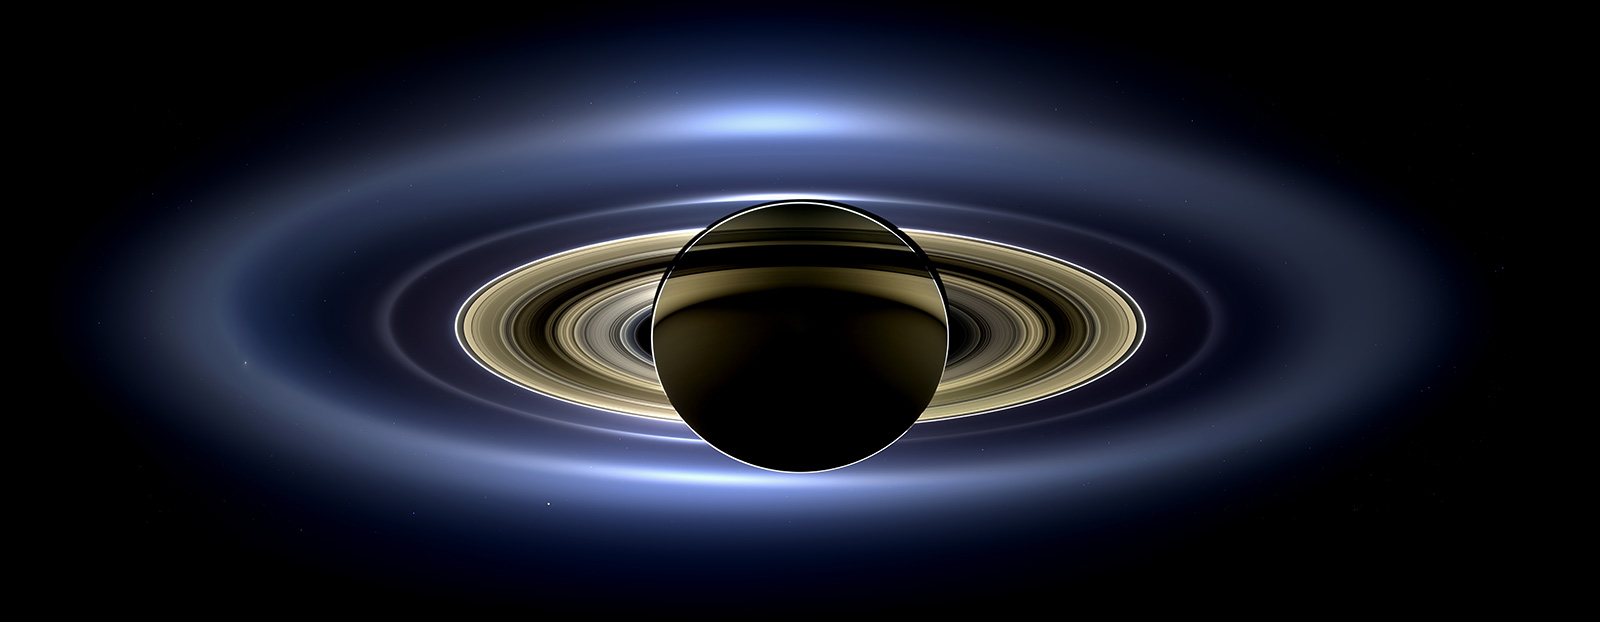 Saturn and rings backlit by the Sun.